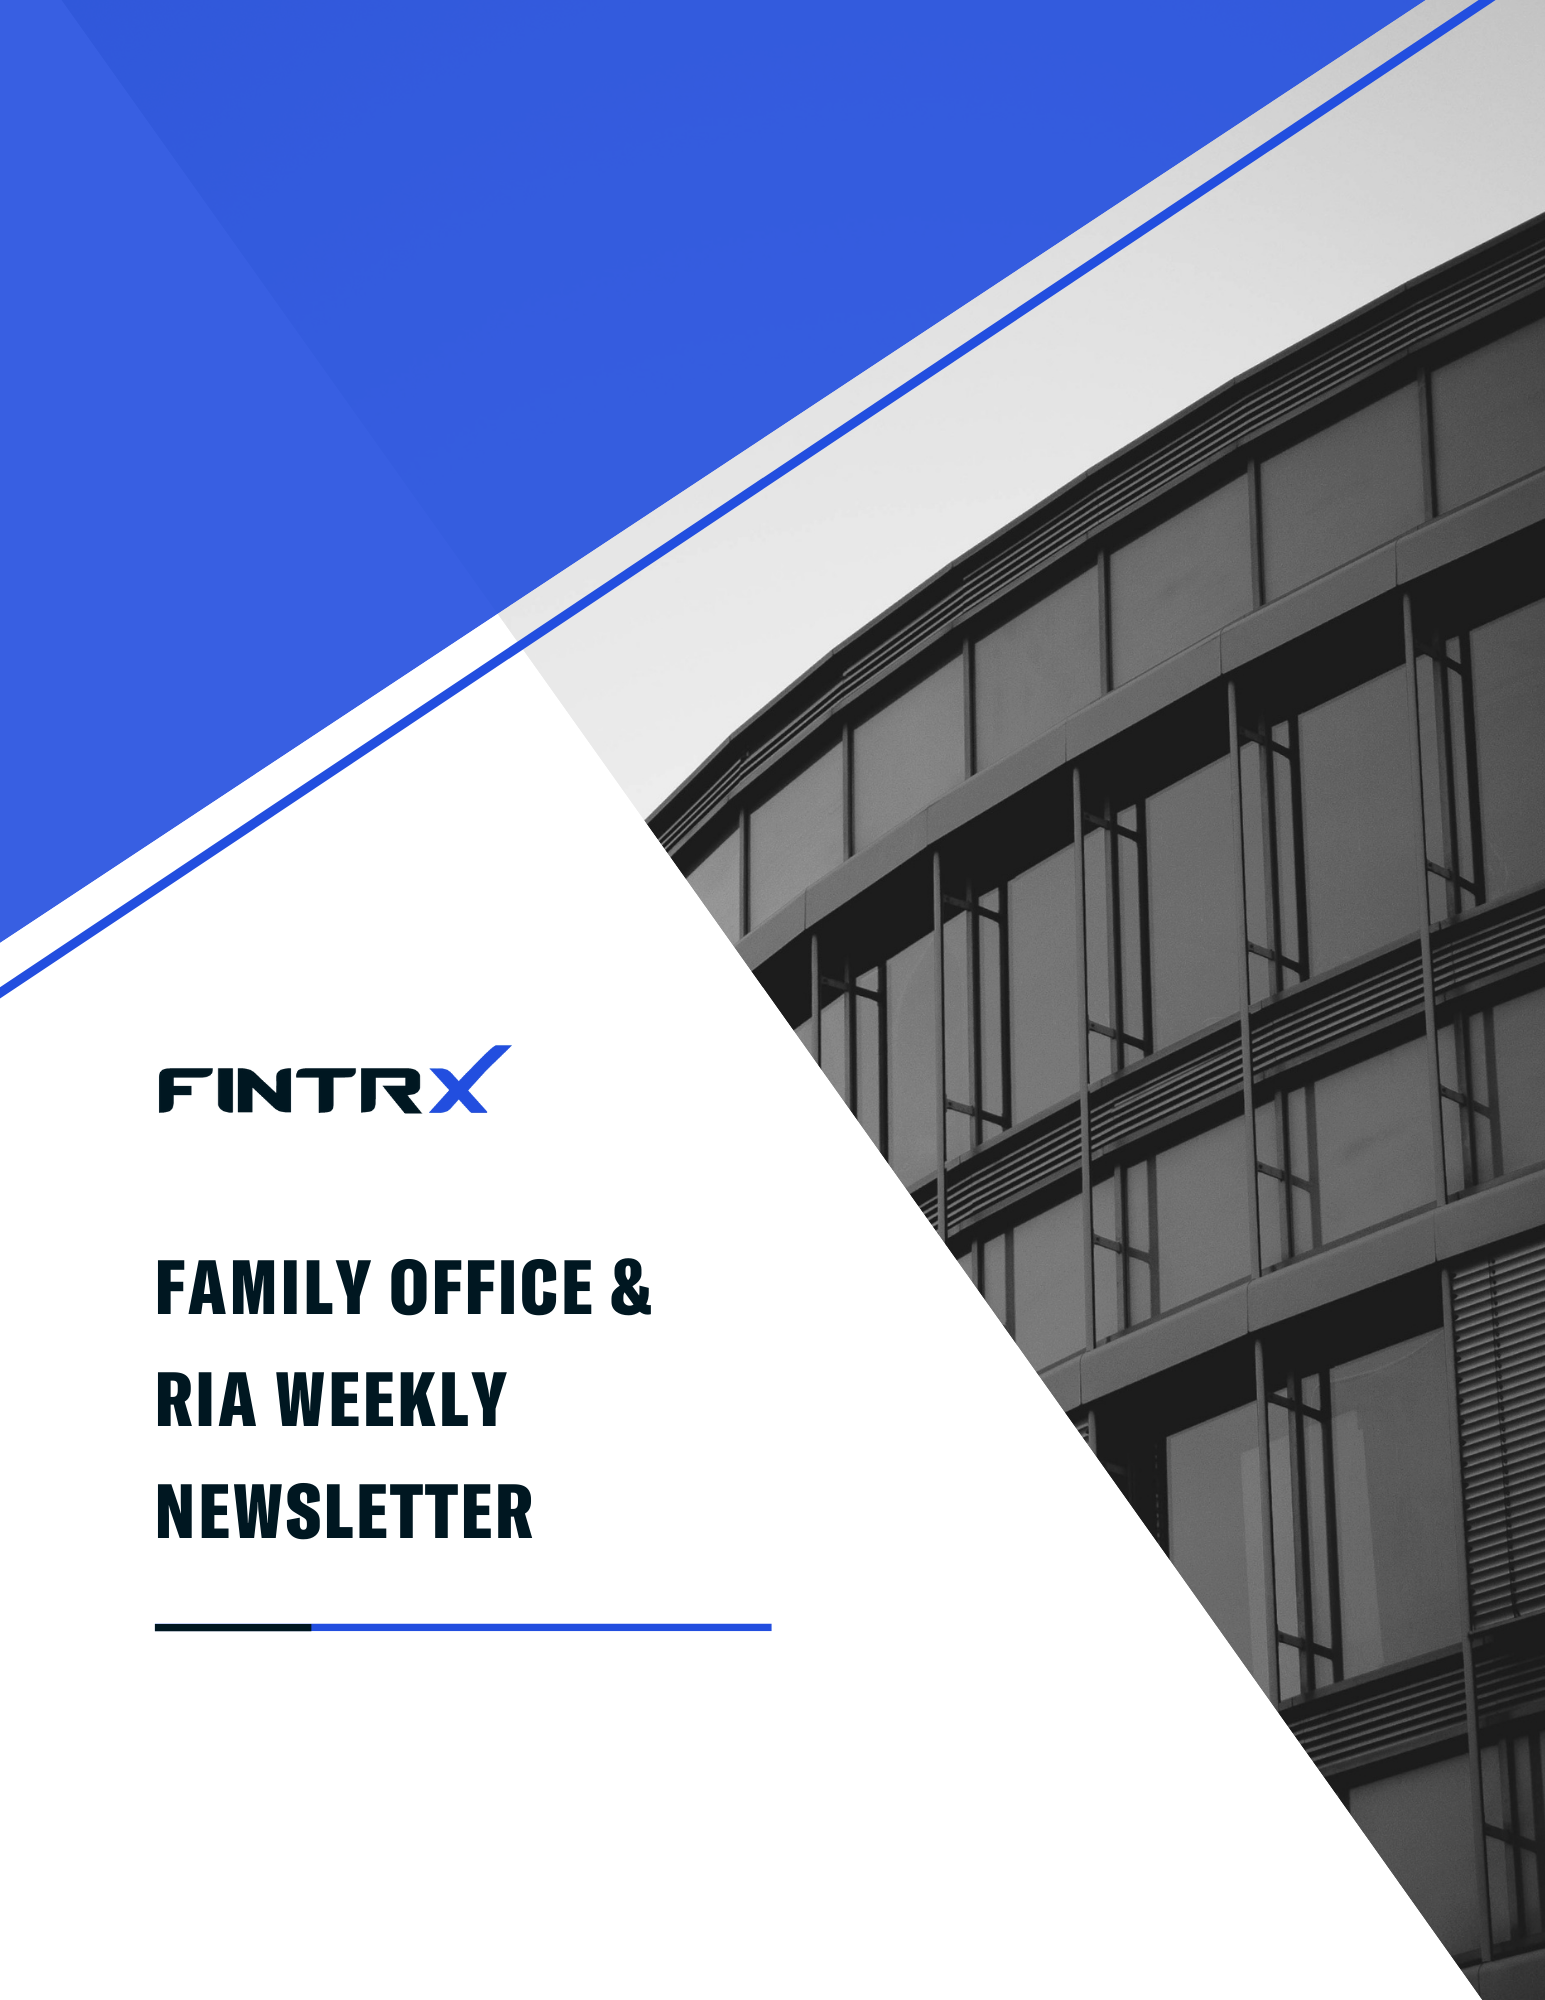 Family Office & RIA Weekly Newsletter Subscribe - FINTRX